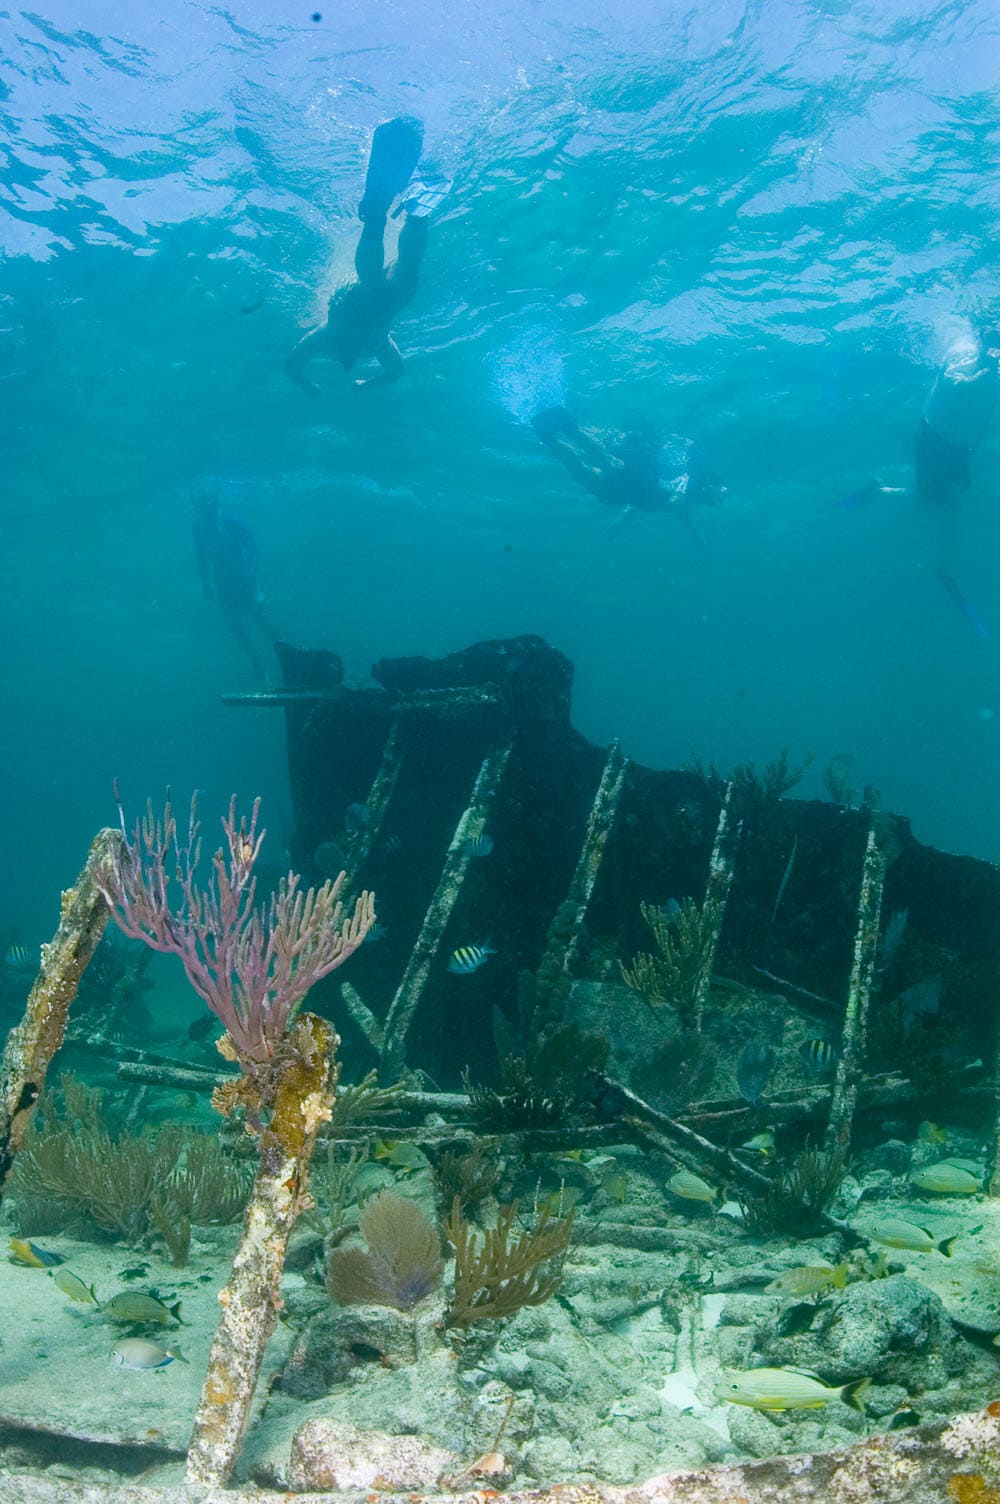 Snorkeling above Mandalay shipwreck on the Maritime Heritage Trail in Biscayne National Park - Image credit: NPS / Brett Seymour, Submerged Resources Center